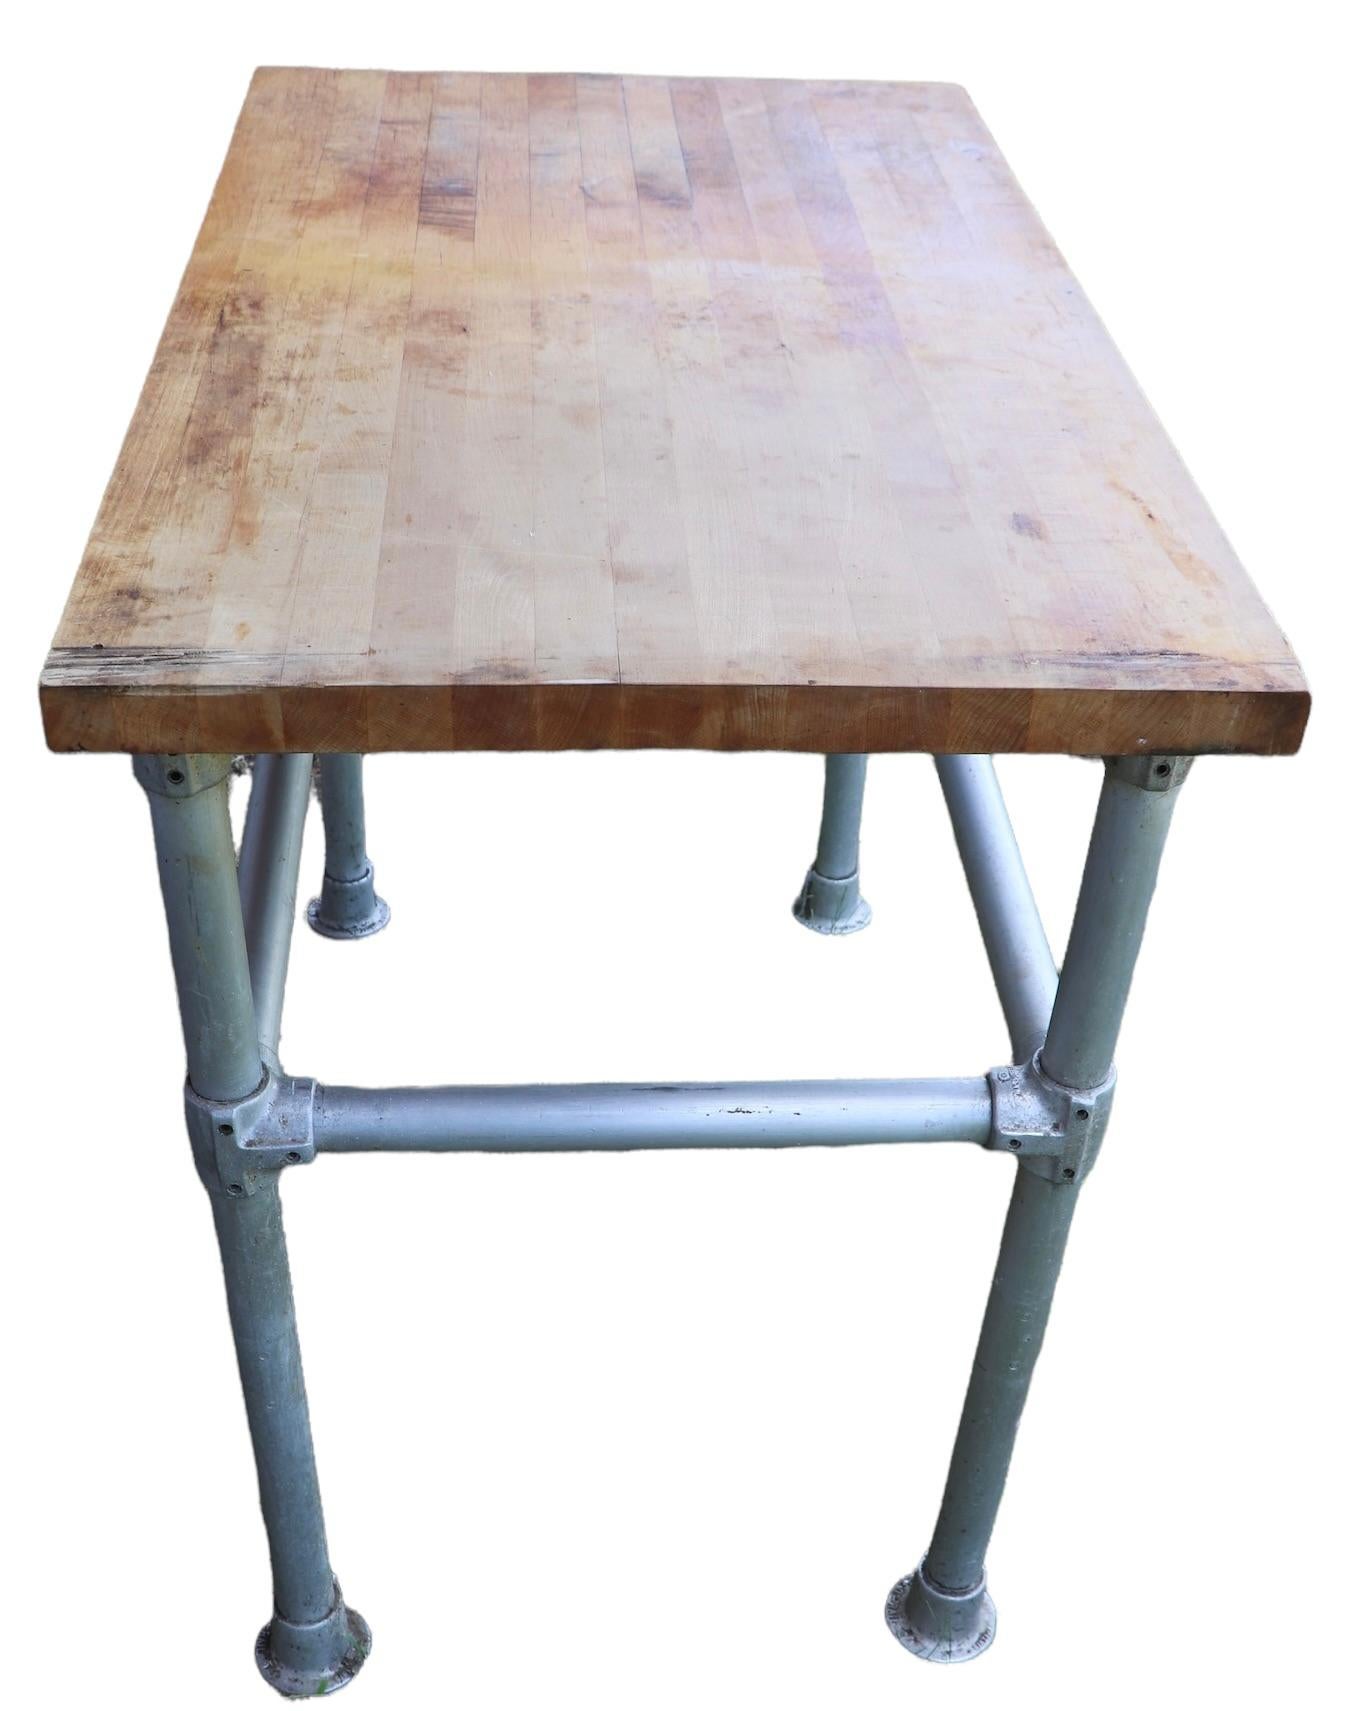 Commercial Butcher Block and Iron Work Table with Storage Drawer  1